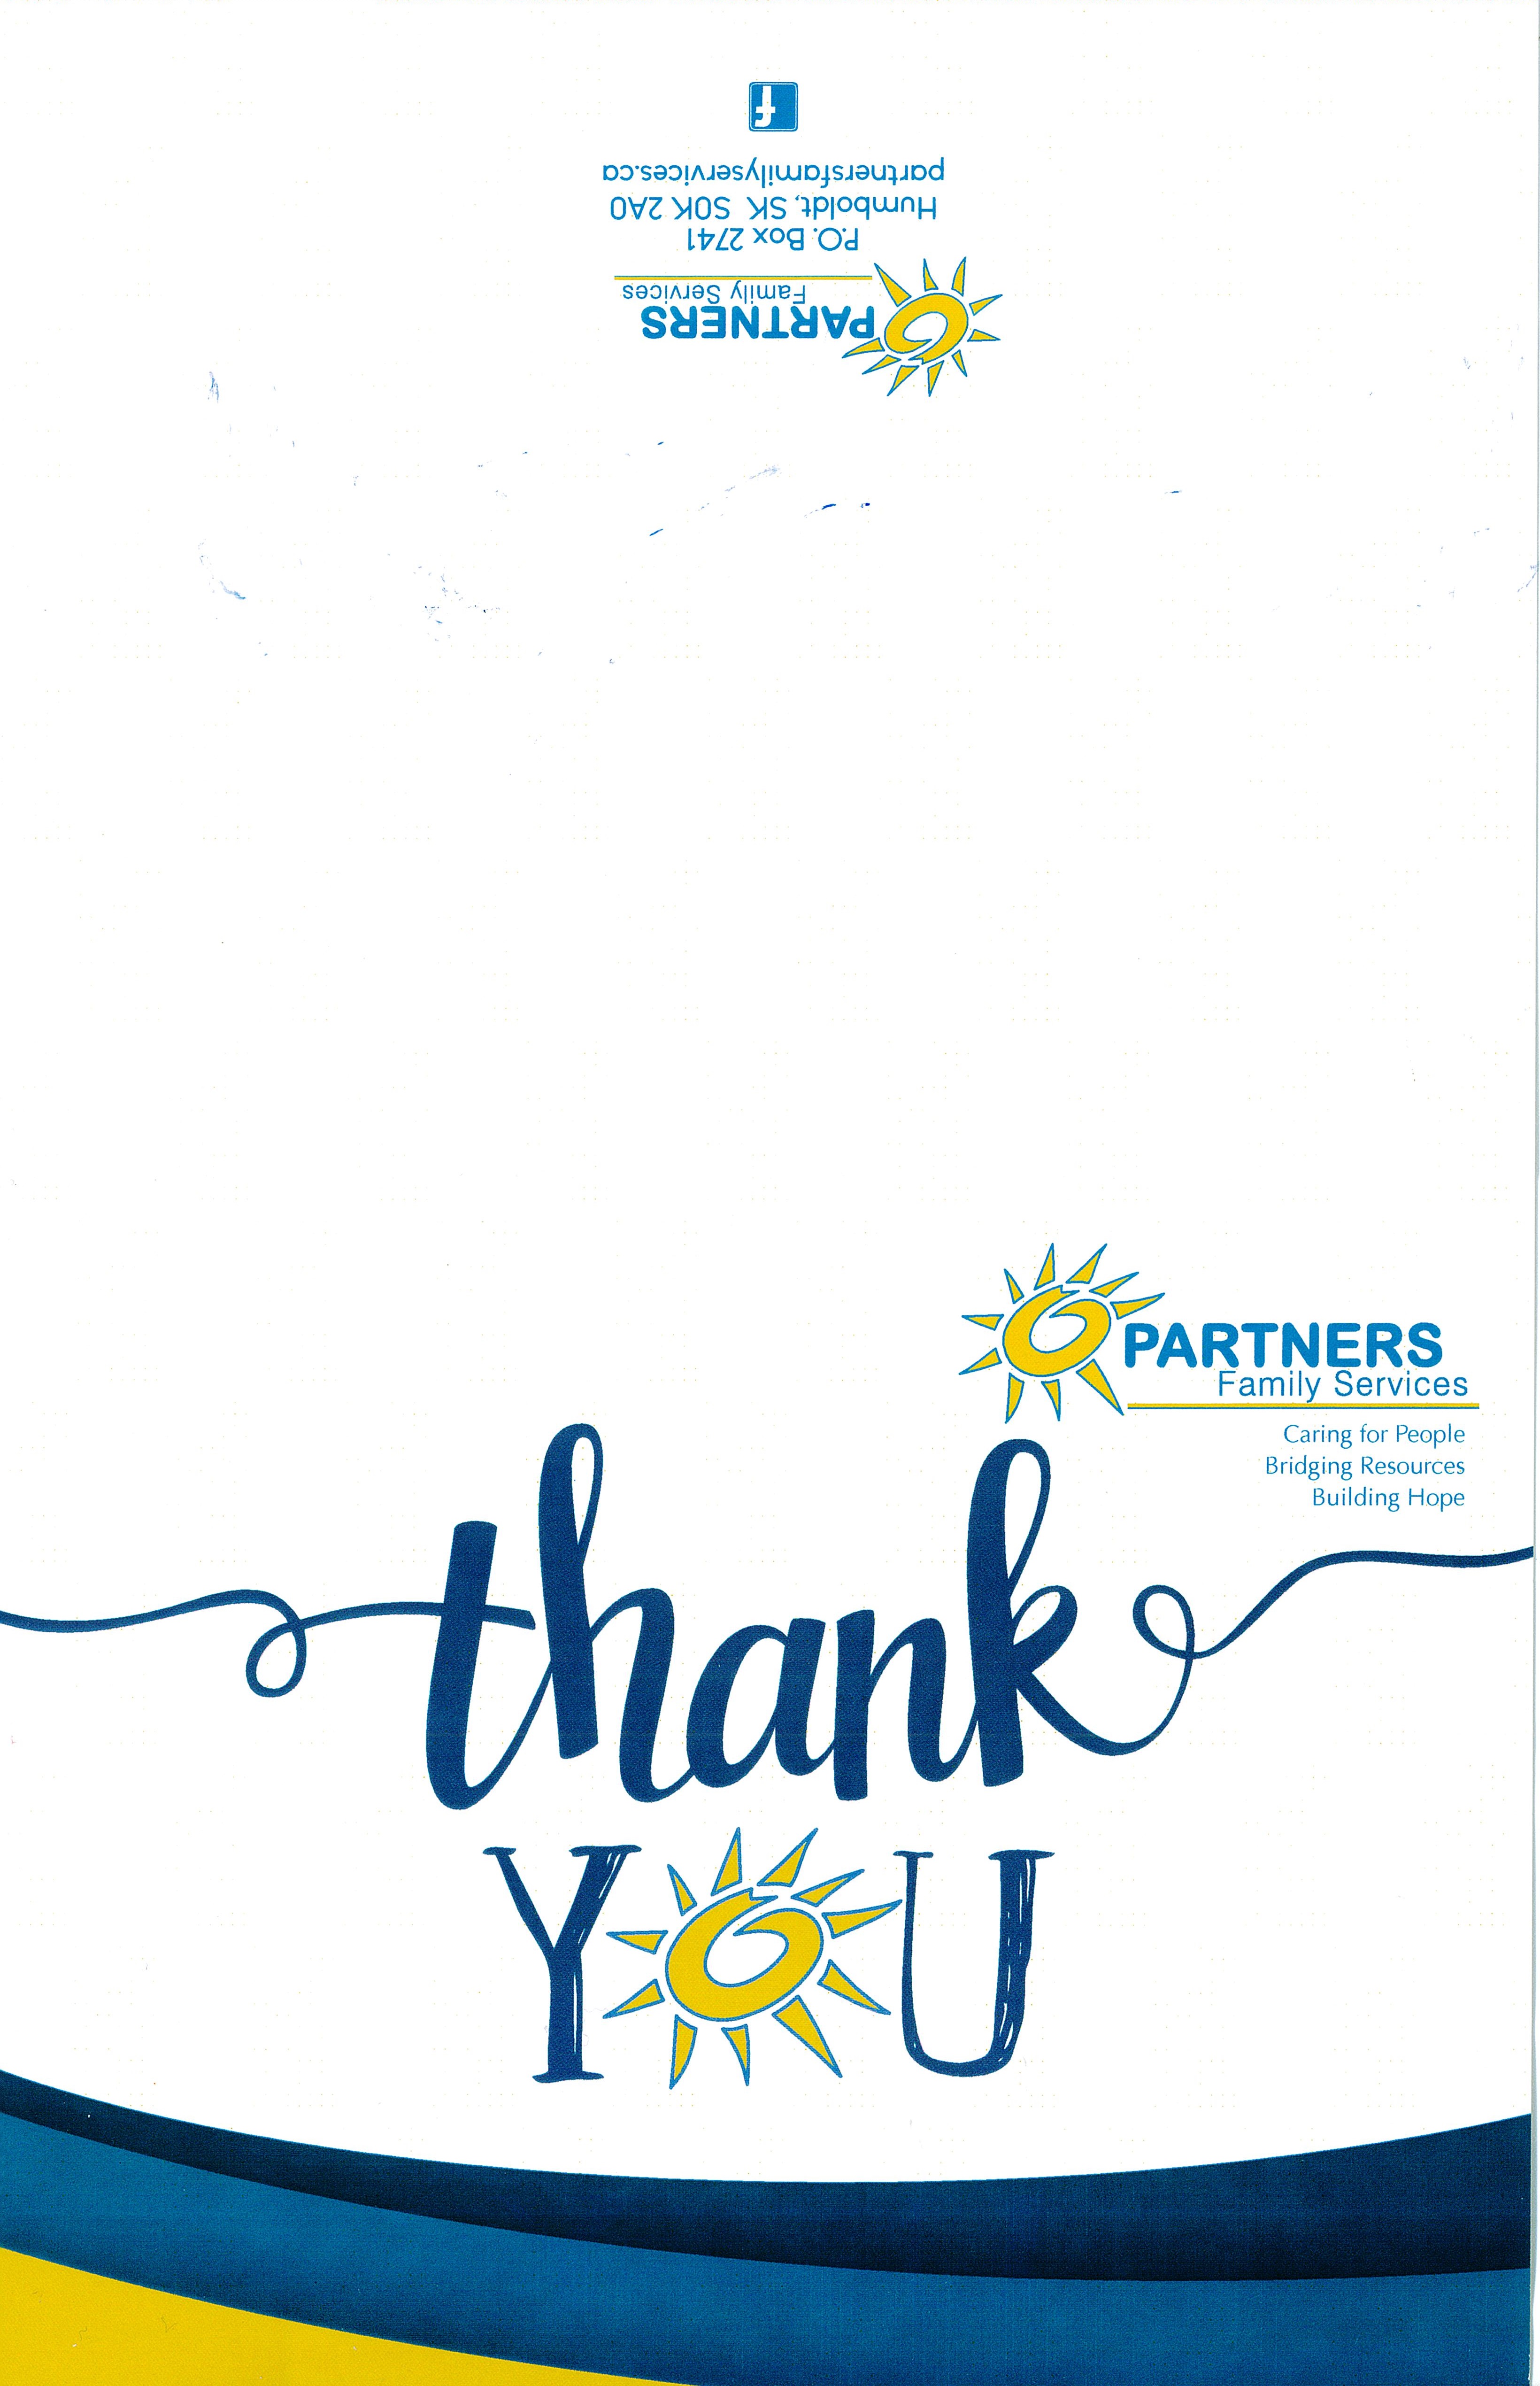 Thank you SGEU from Partners Family Services